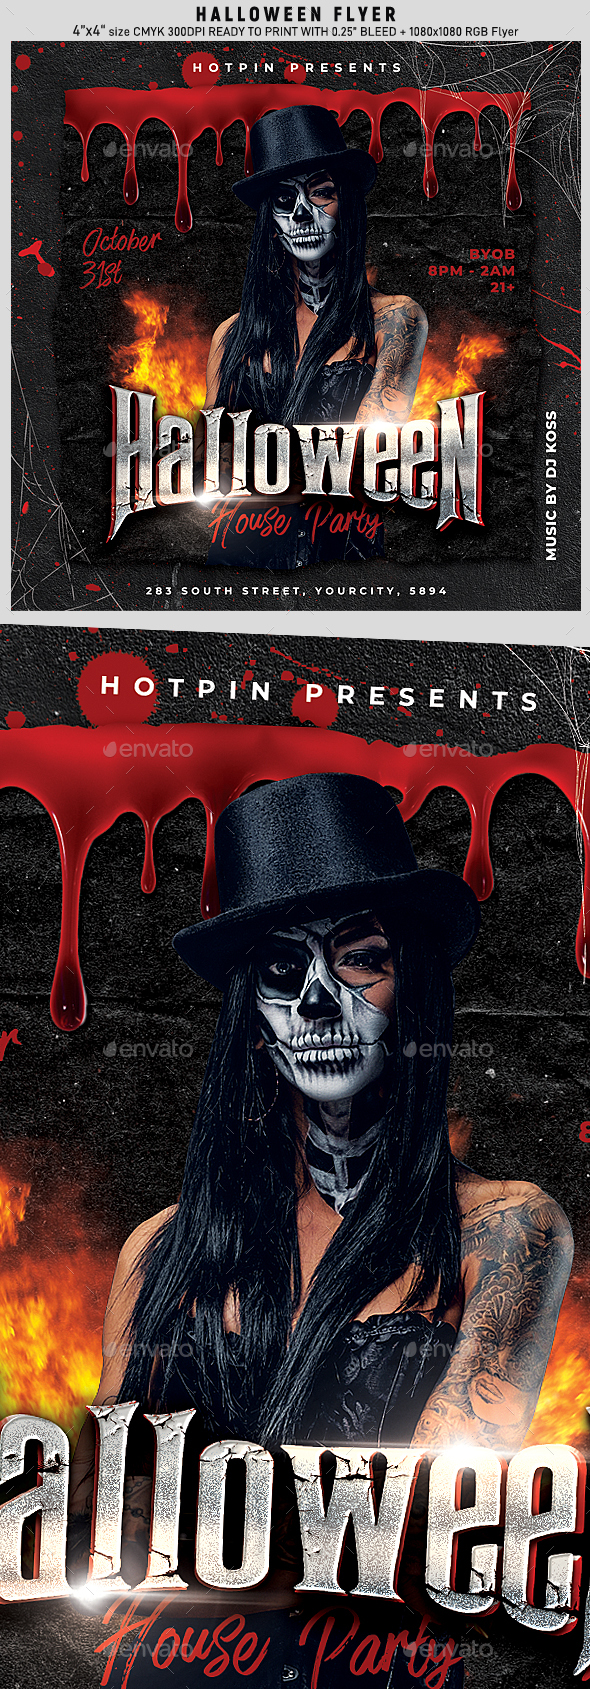 Halloween Flyer Templates From Graphicriver